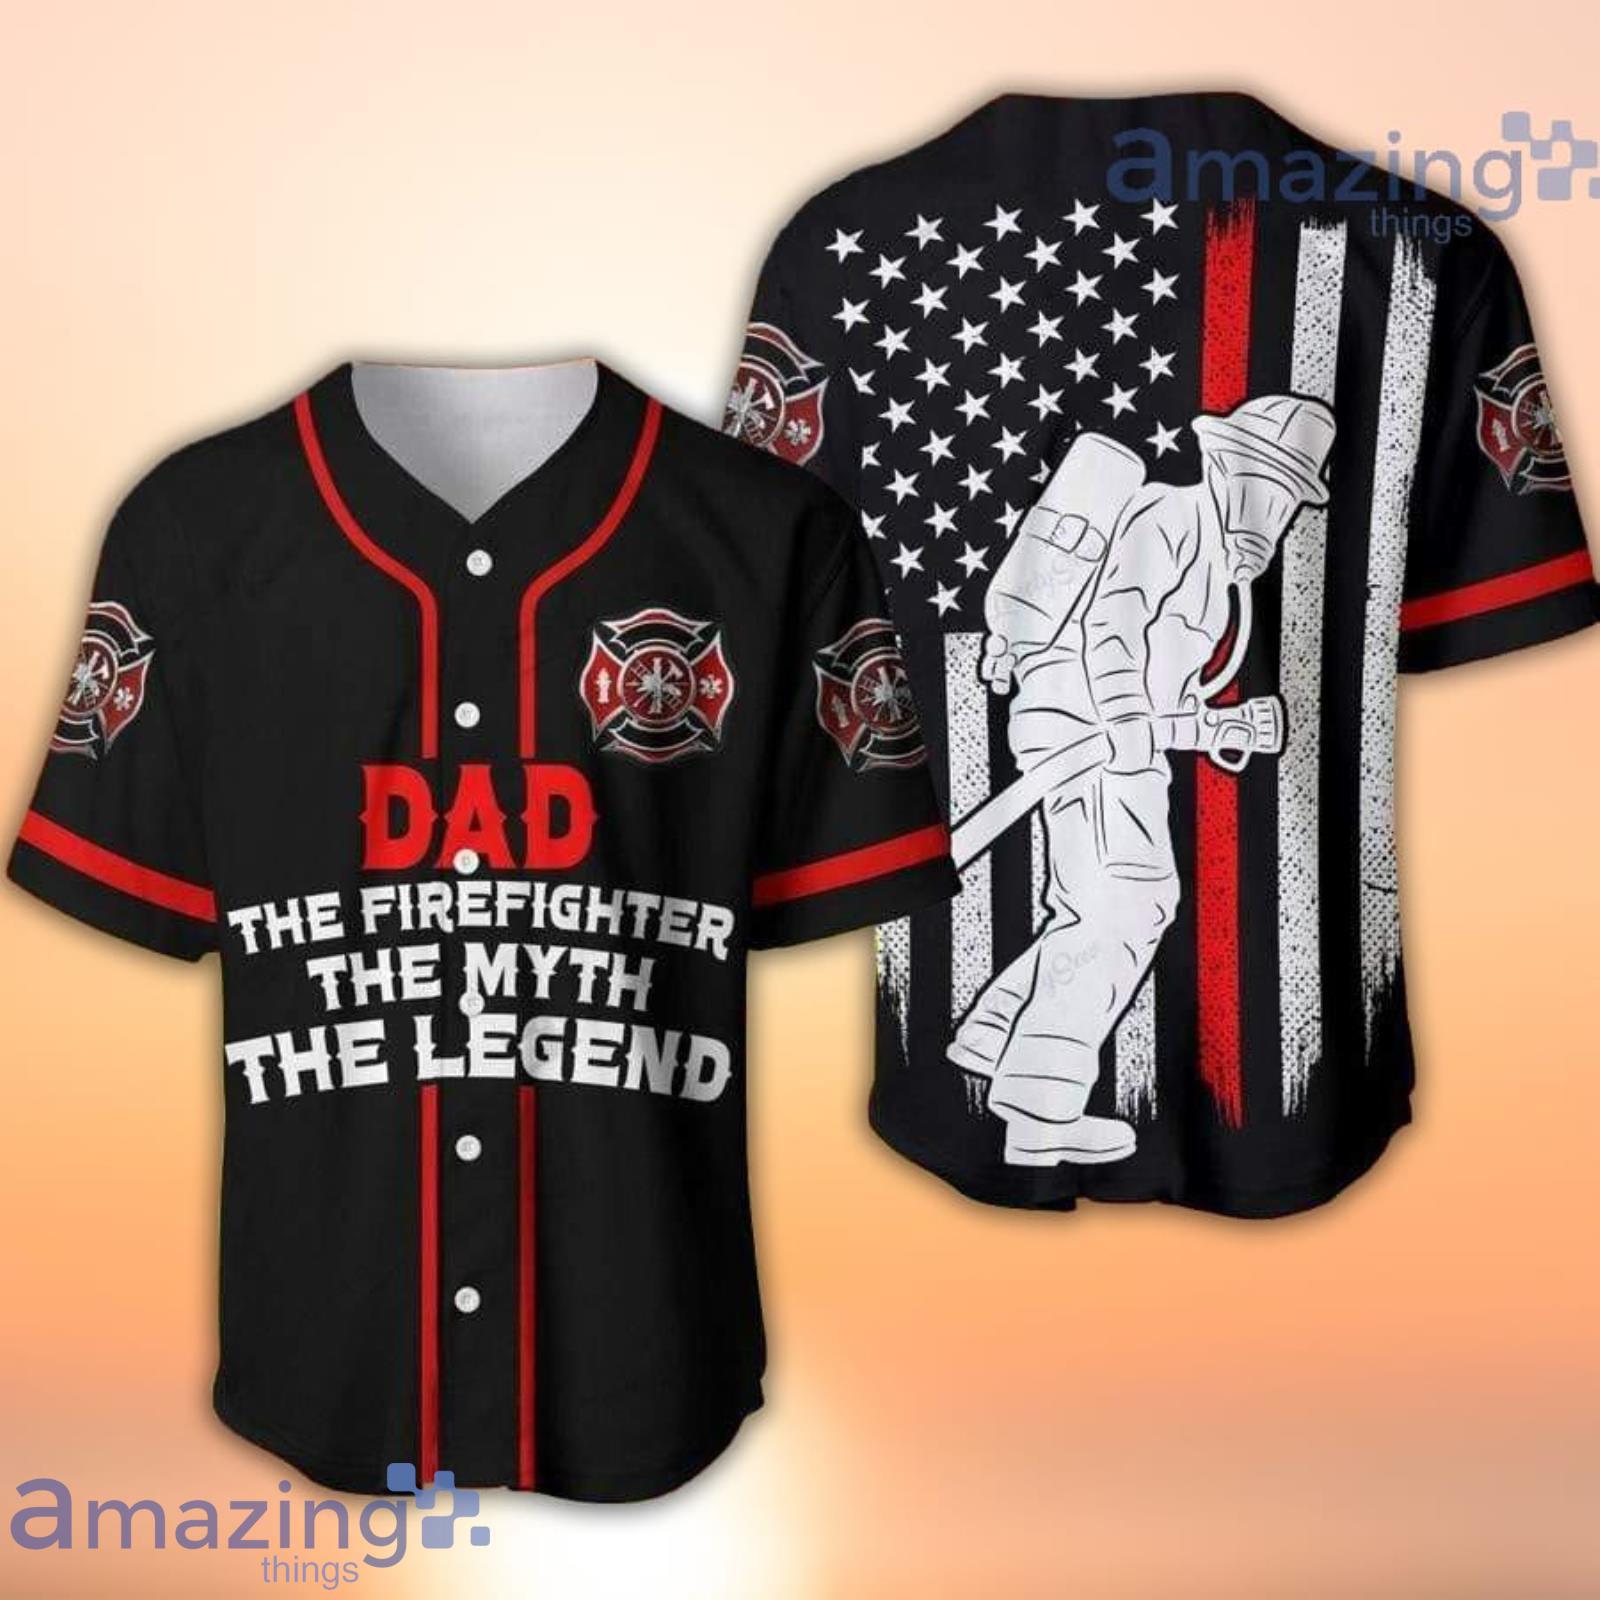 Firefighter Dad Baseball Jersey Shirt Father's Day Gift